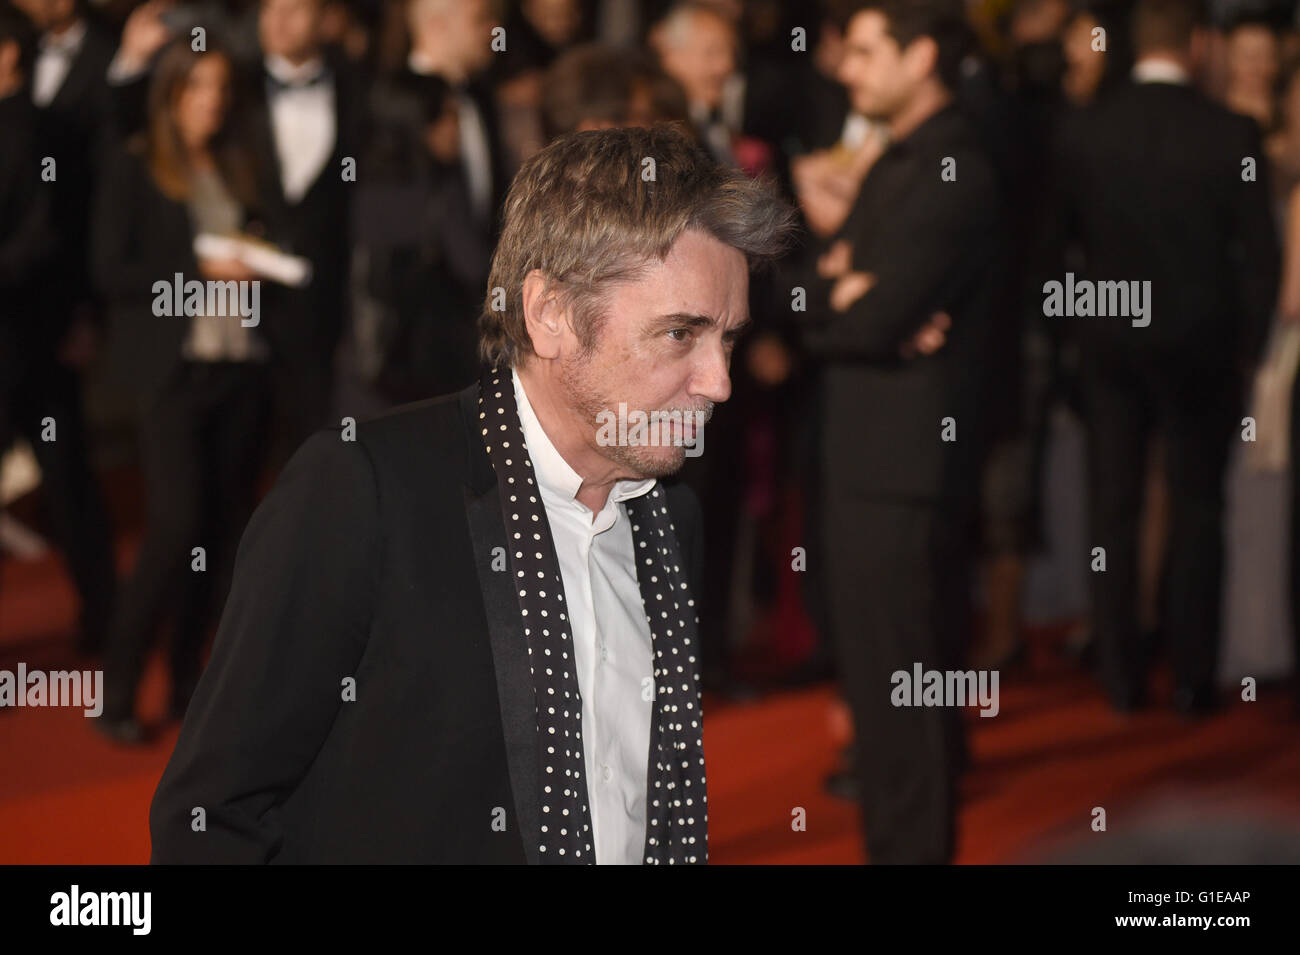 Cannes, France. 13th May, 2016. Jean-Michel Jarre arrive for the screening of 'I, Daniel Blake'arrive for the screening of 'I, Daniel Blake' during the 69th annual Cannes Film Festival, in Cannes, France, 13 May 2016. Photo: Felix Hoerhager/dpa/Alamy Live News Stock Photo